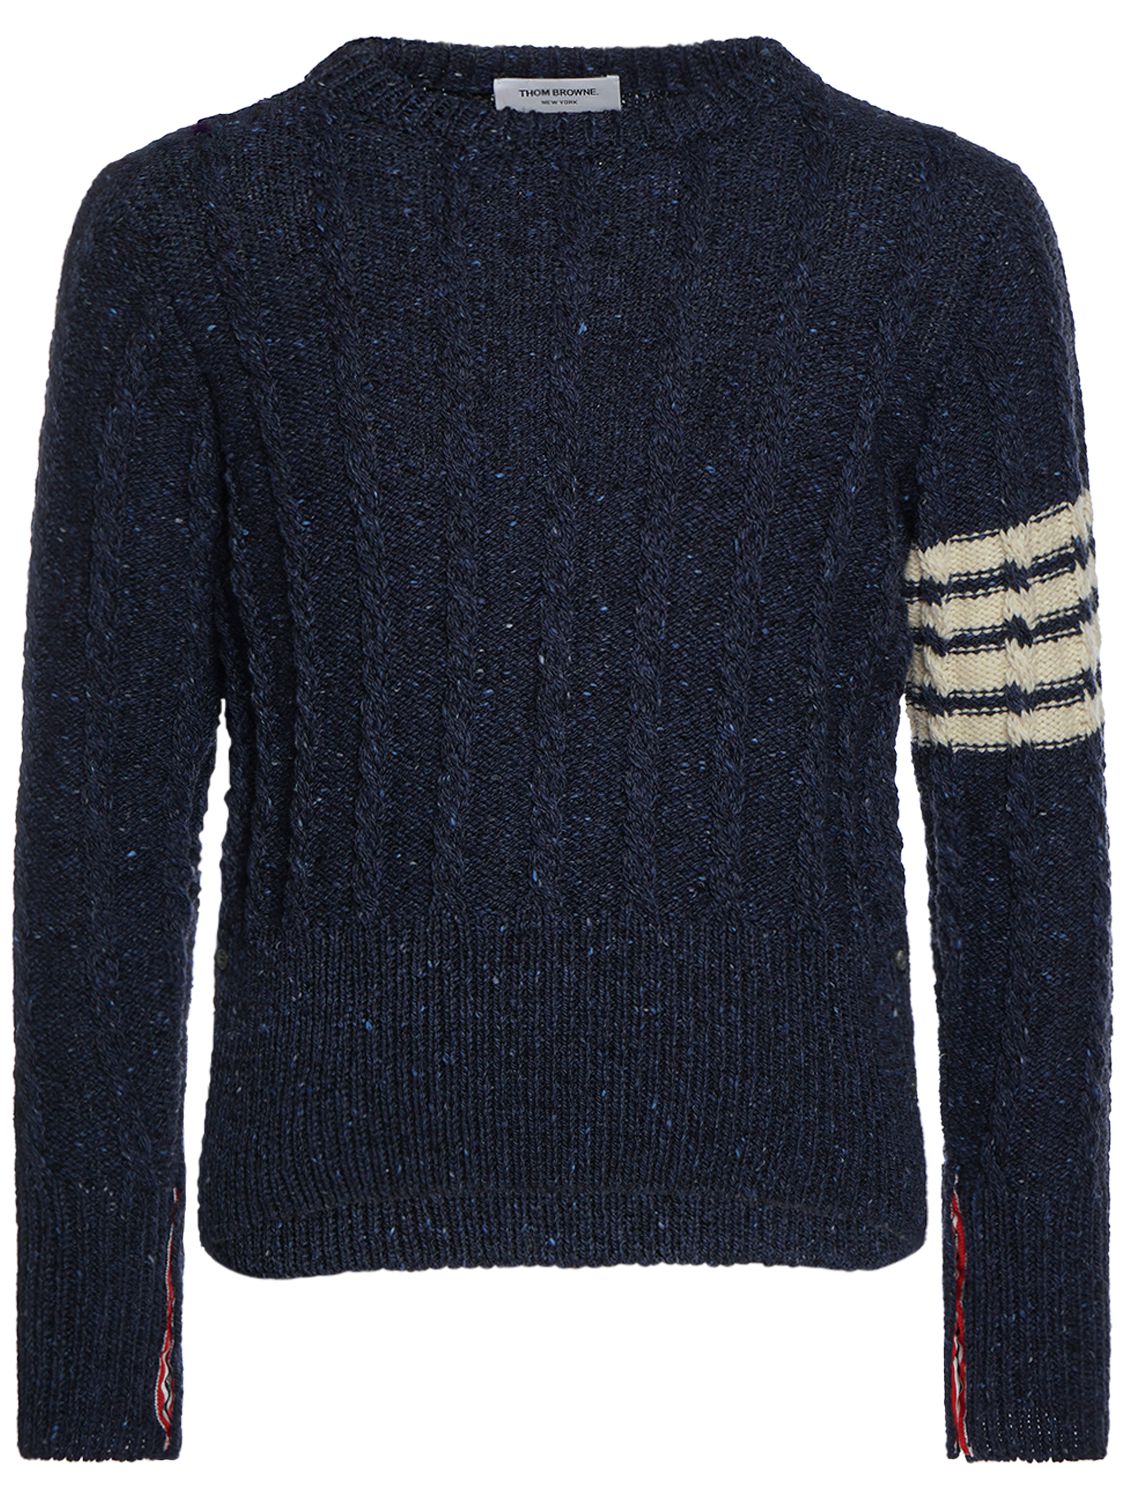 Twist Cable Crewneck Wool Sweater